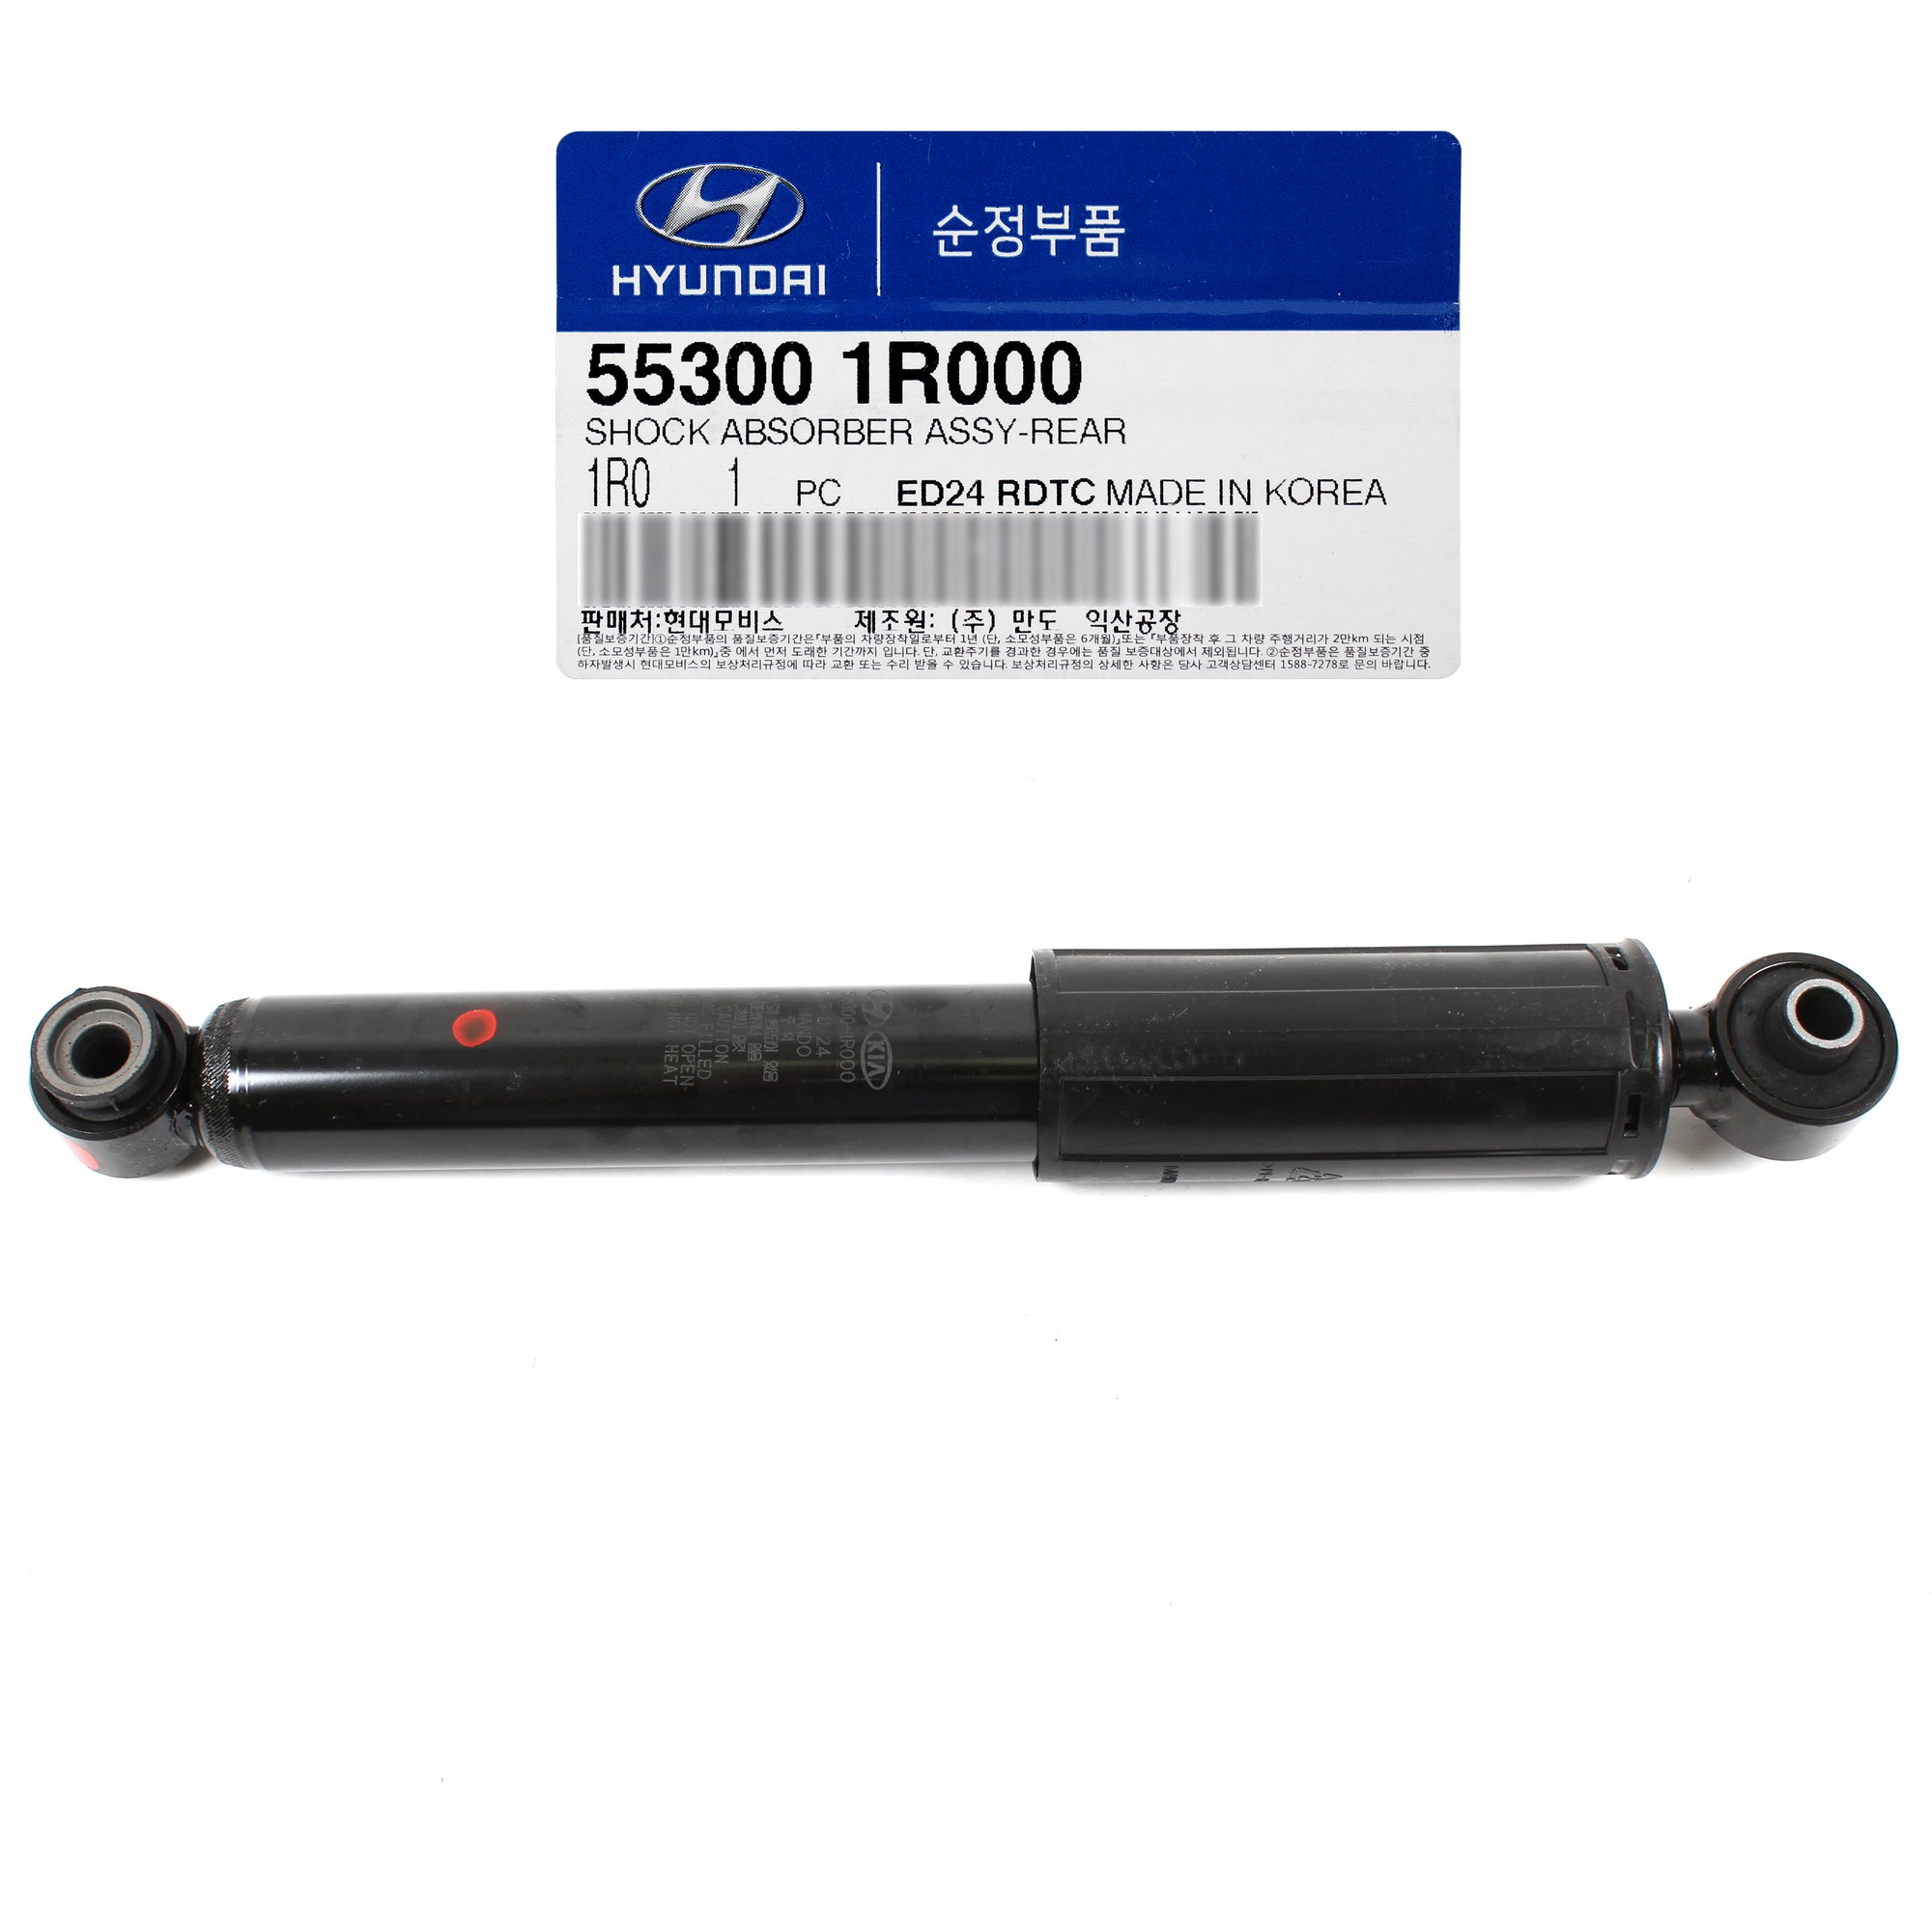 GENUINE SHOCK ABSORBER REAR for 12-17 HYUNDAI ACCENT OEM 553001R000 553001R300